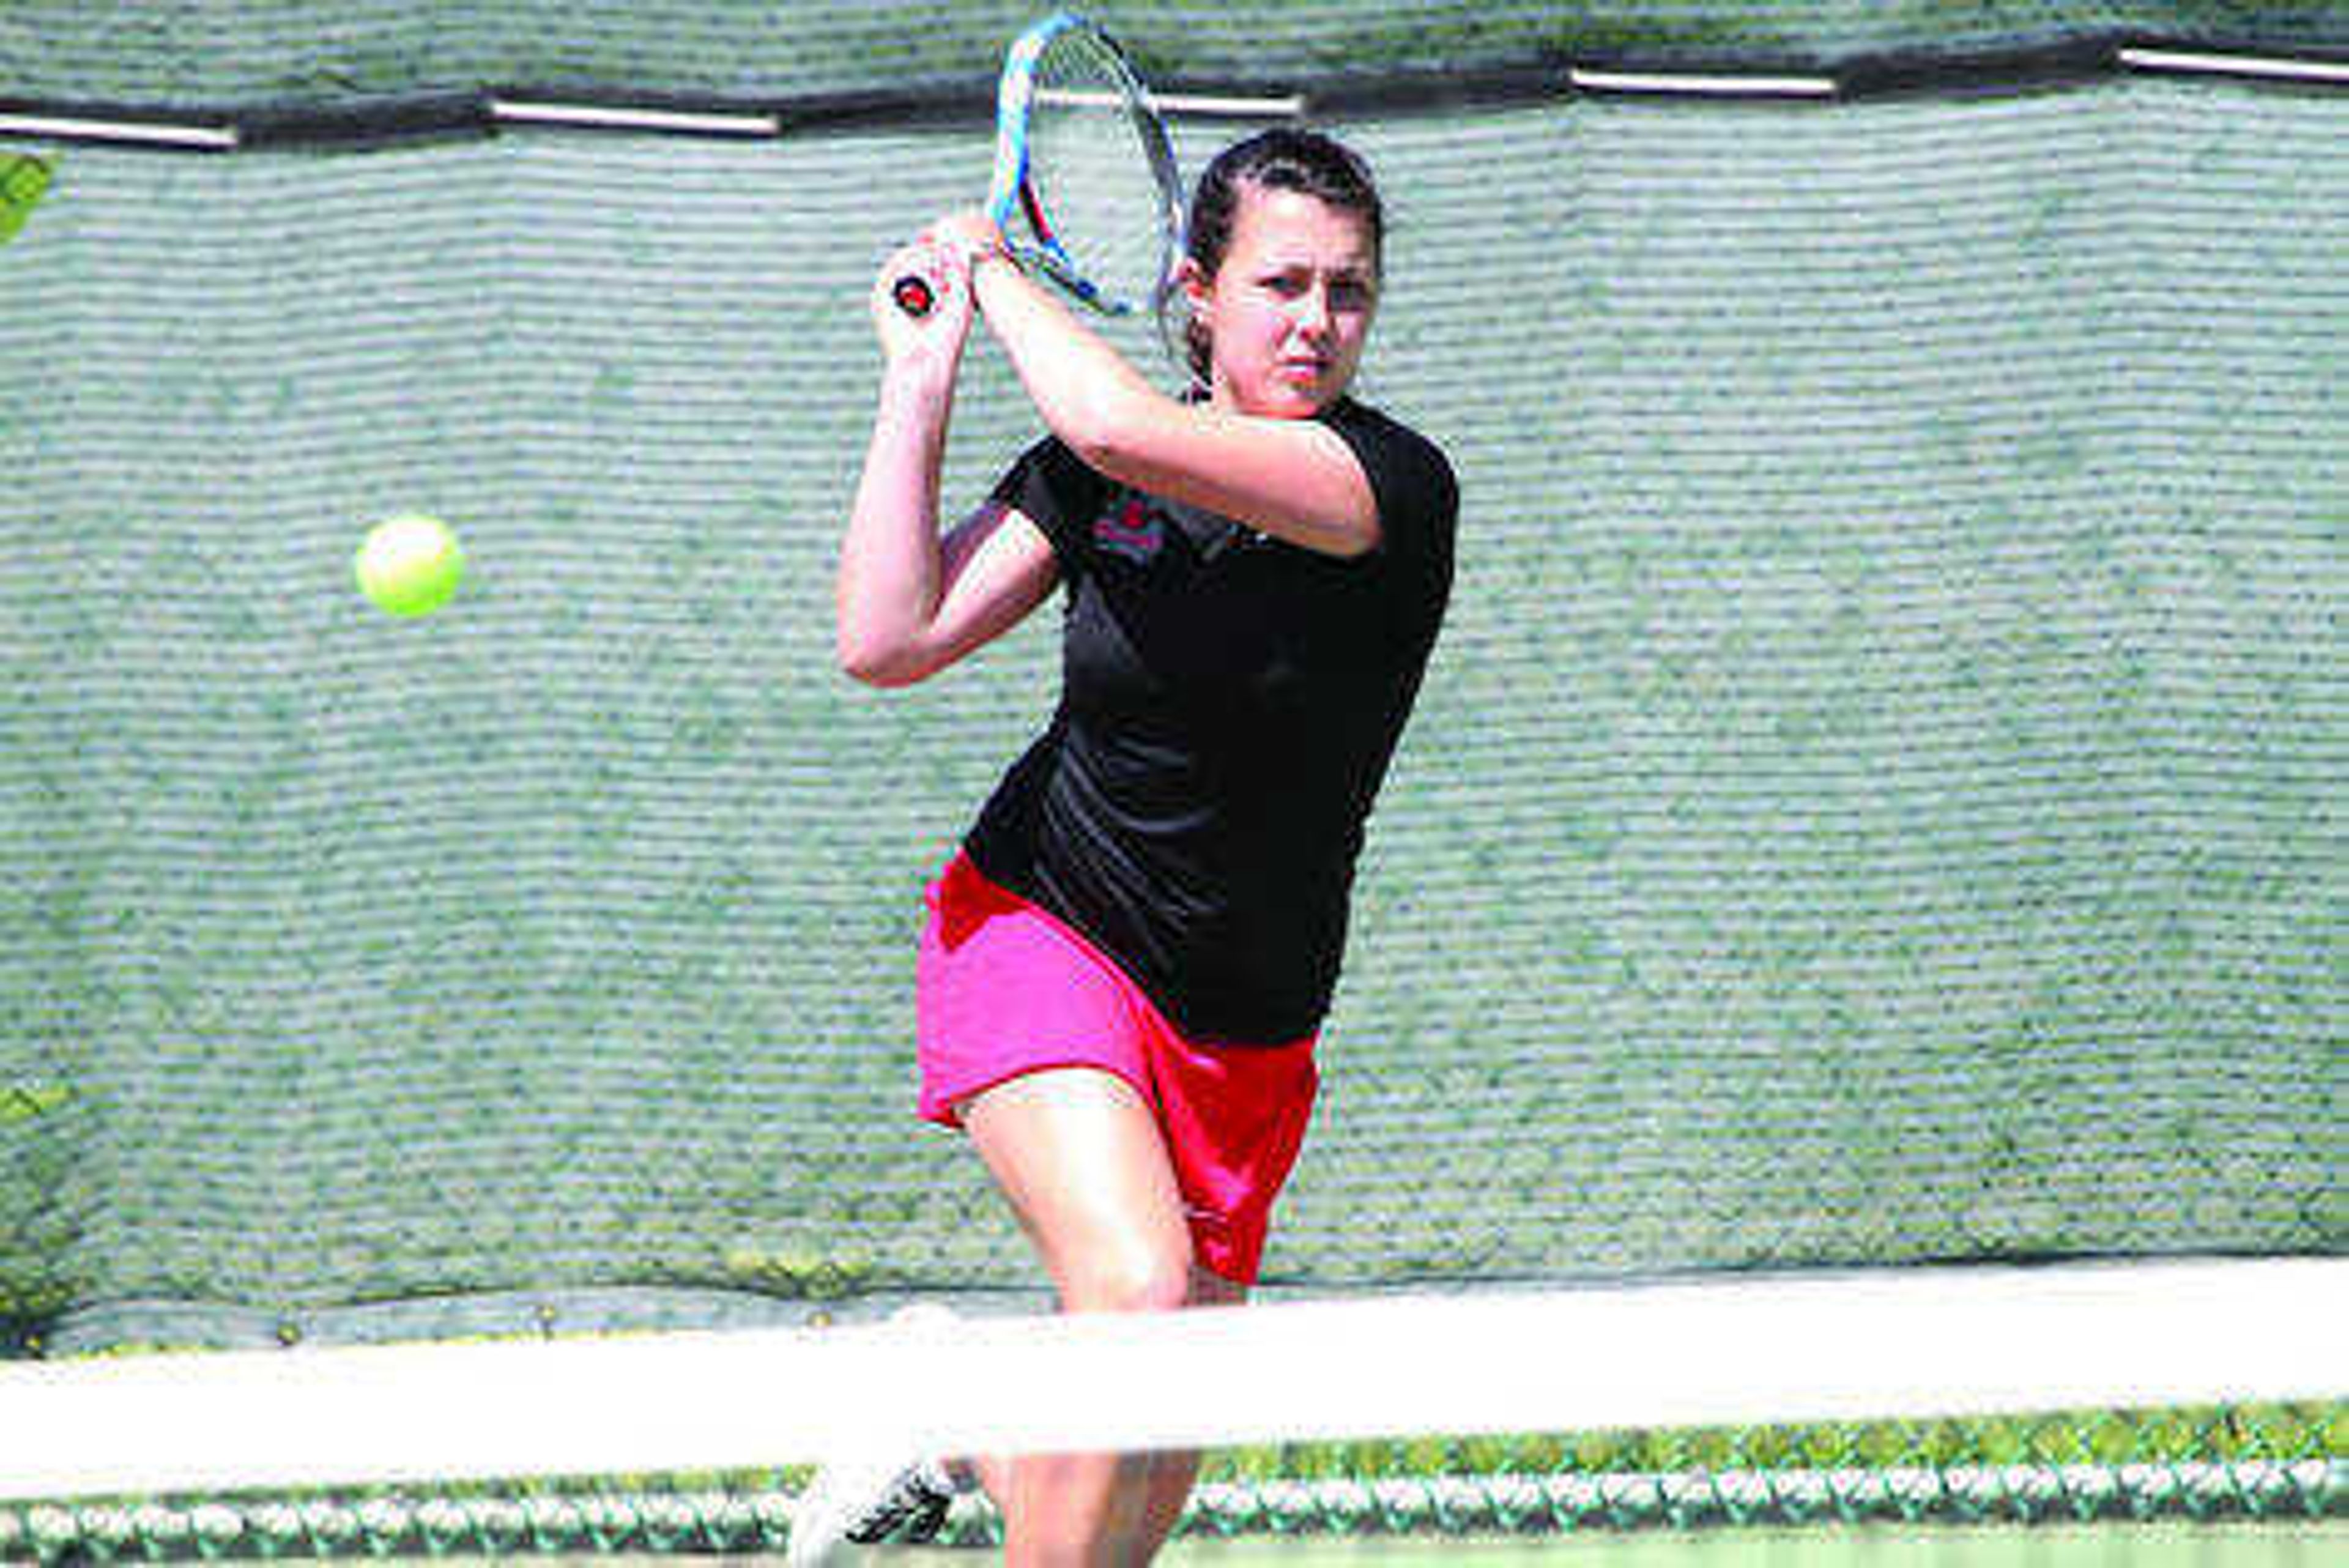 Melissa Martin competing in a match from last season.